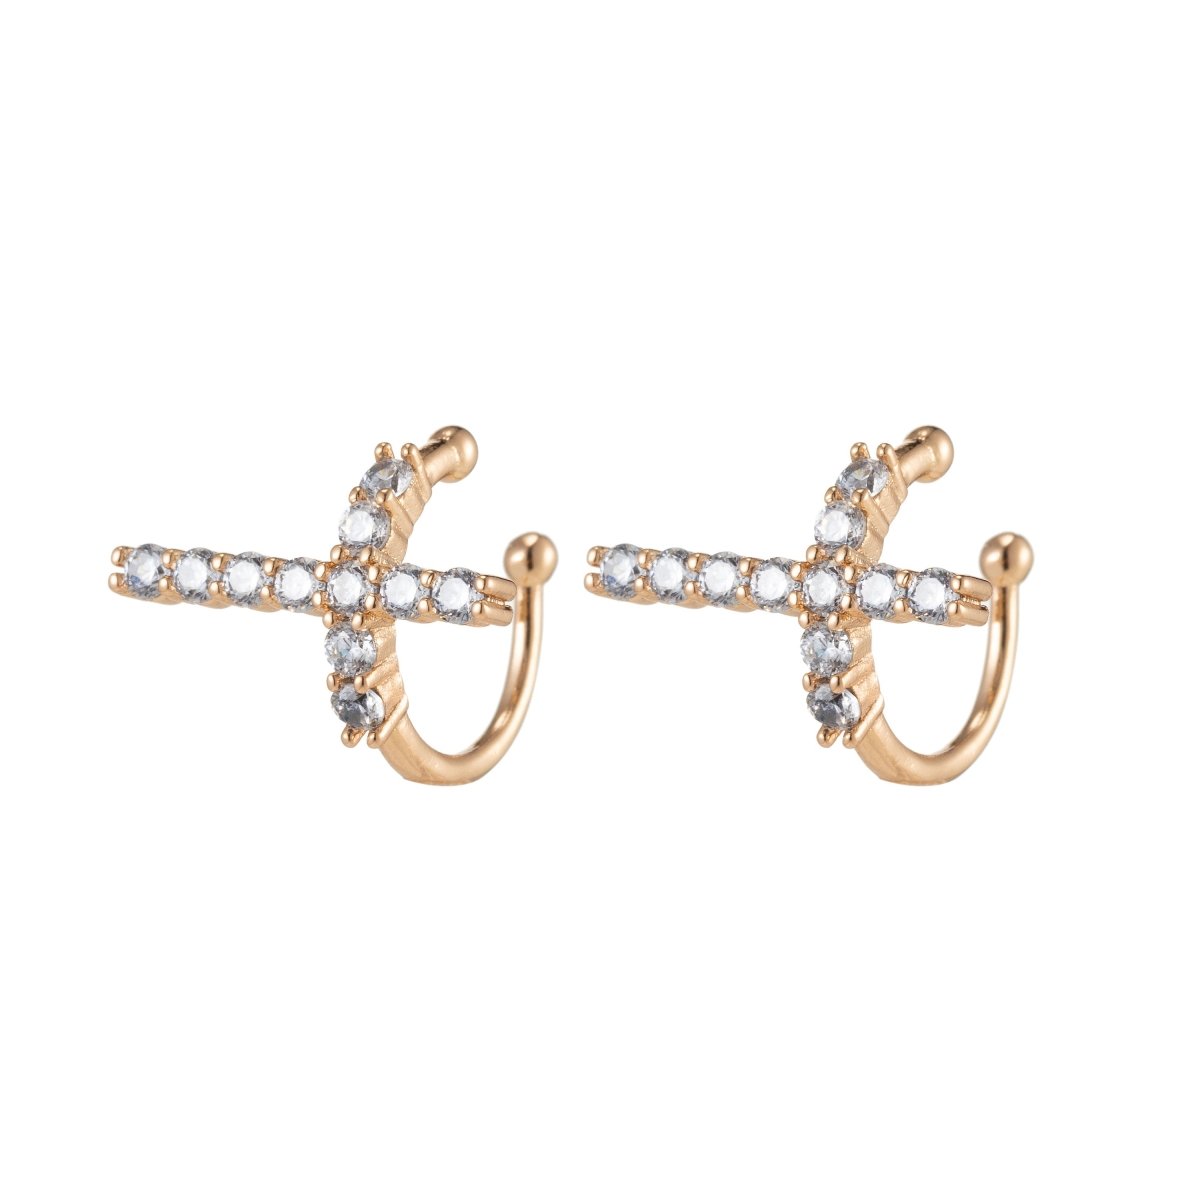 1x Dainty Cross Ear Cuffs for Non Pierced Ears Micro Pave Crystal Gold Clip on Conch Cuff Earrings for Women Girls AI-048 - DLUXCA